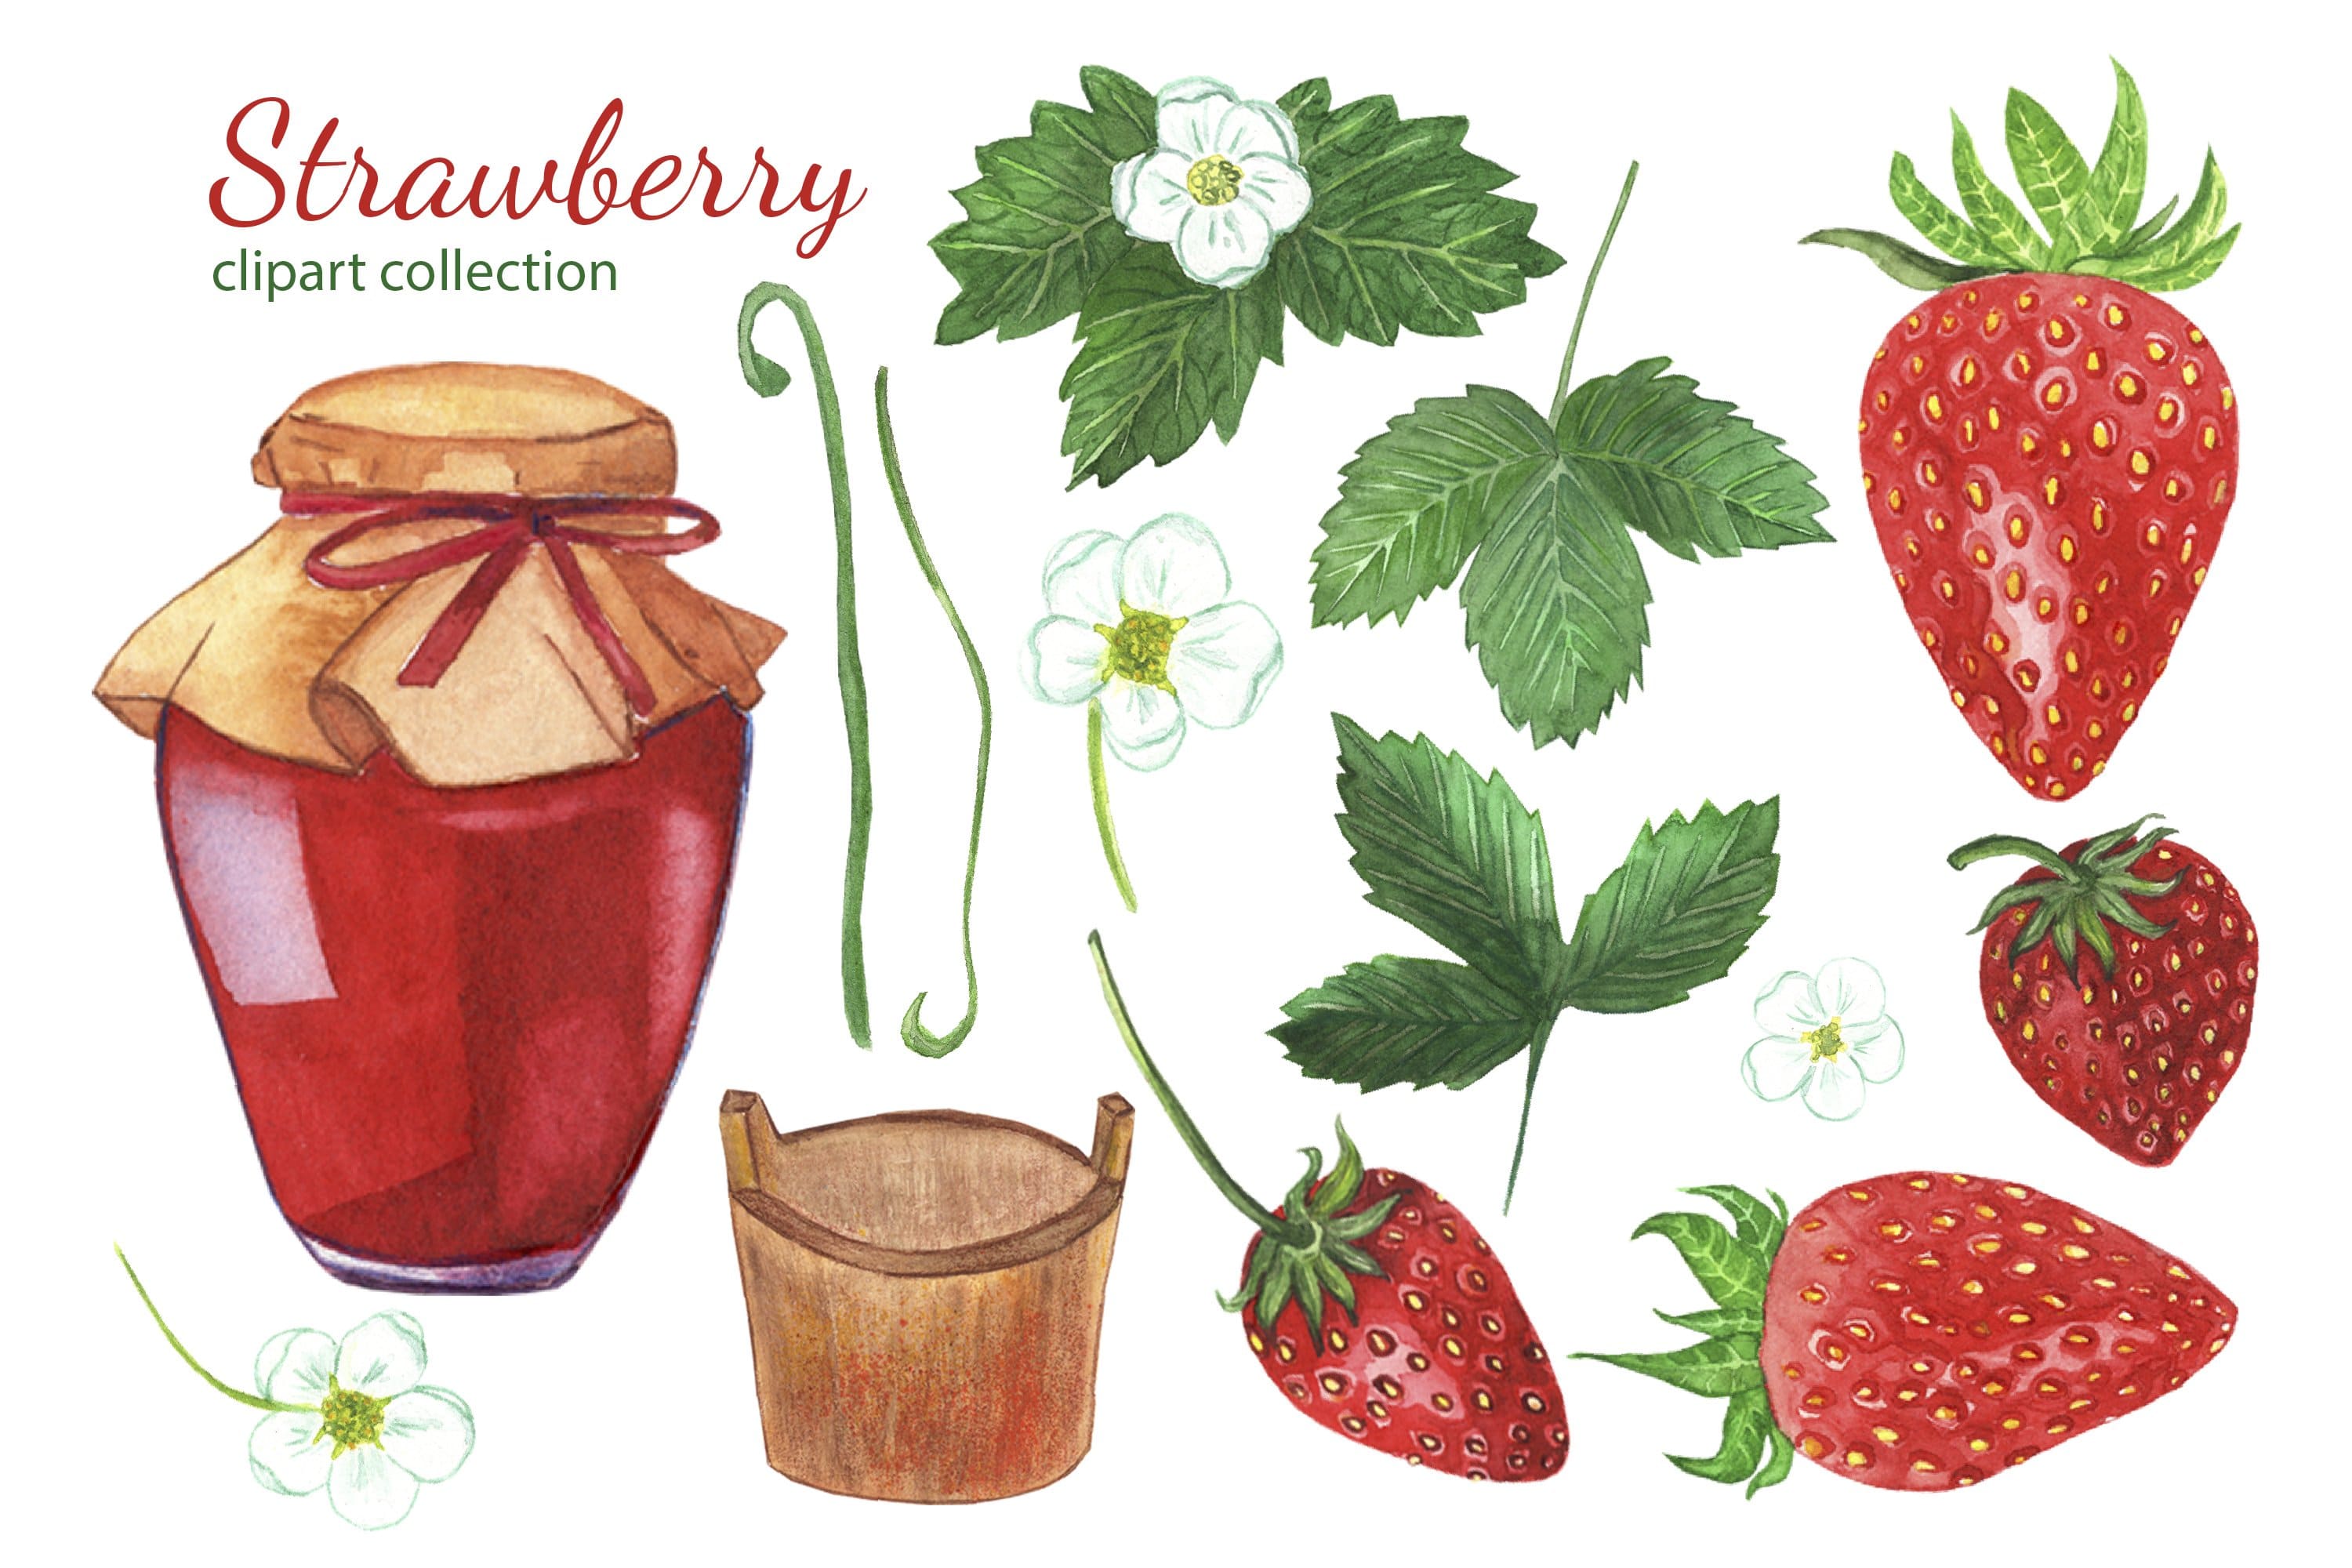 Elements of strawberry clipart collection.